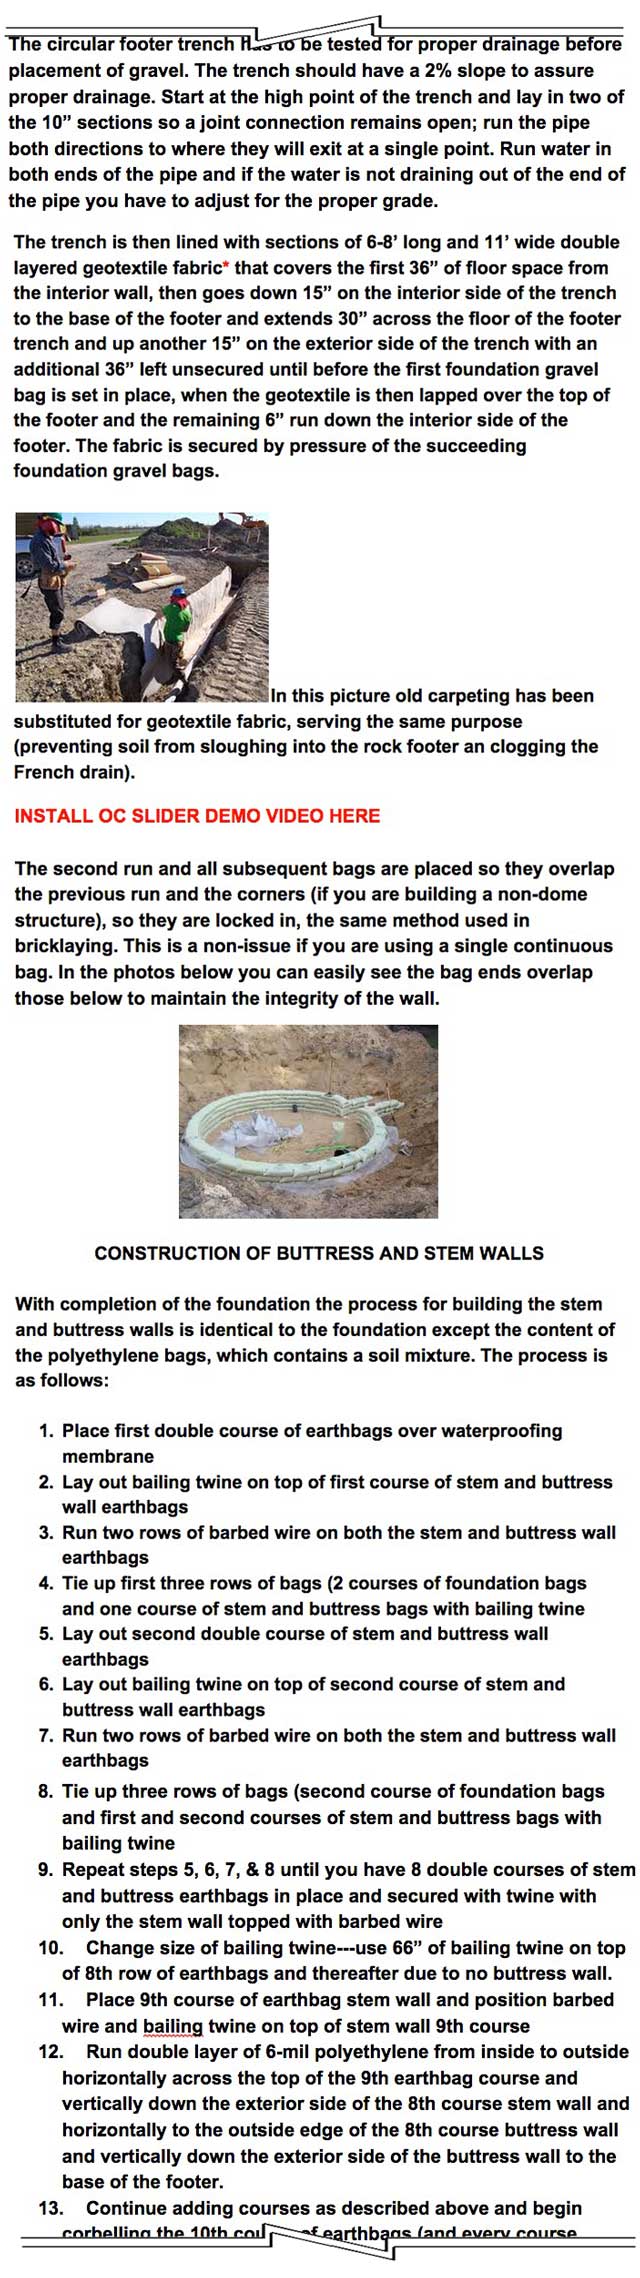 continued what we hope will be the final revision of the Footers, Foundations and Flooring page for the upcoming crowdfunding campaign. This week included adding geotextile fabric and perforated corrugated pipe descriptions, re-calculating lengths of geotextile and polyethylene, altering the water collection gutter with additional stucco and dropping the polyethylene barrier down one more bag on the interior wall, plus rewriting the sequence of steps for foundation and stem buttress and earthbag walls, One Community